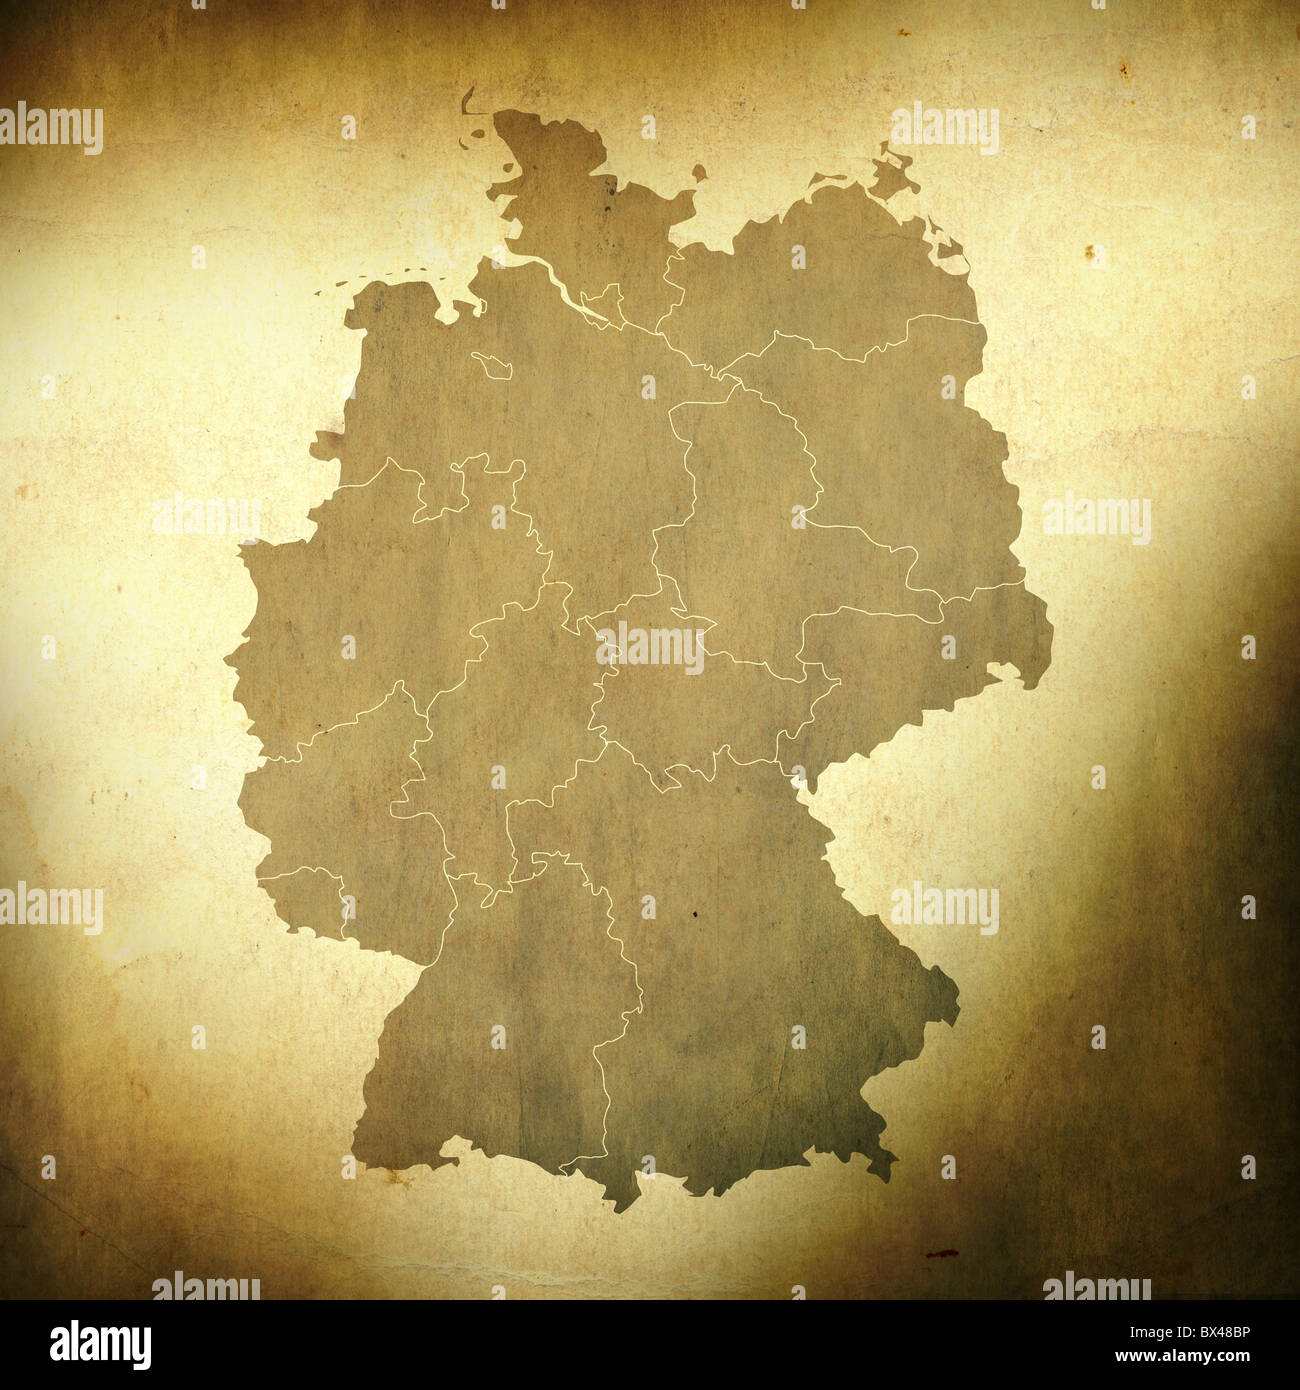 There is a map of Germany on grunge paper background Stock Photo